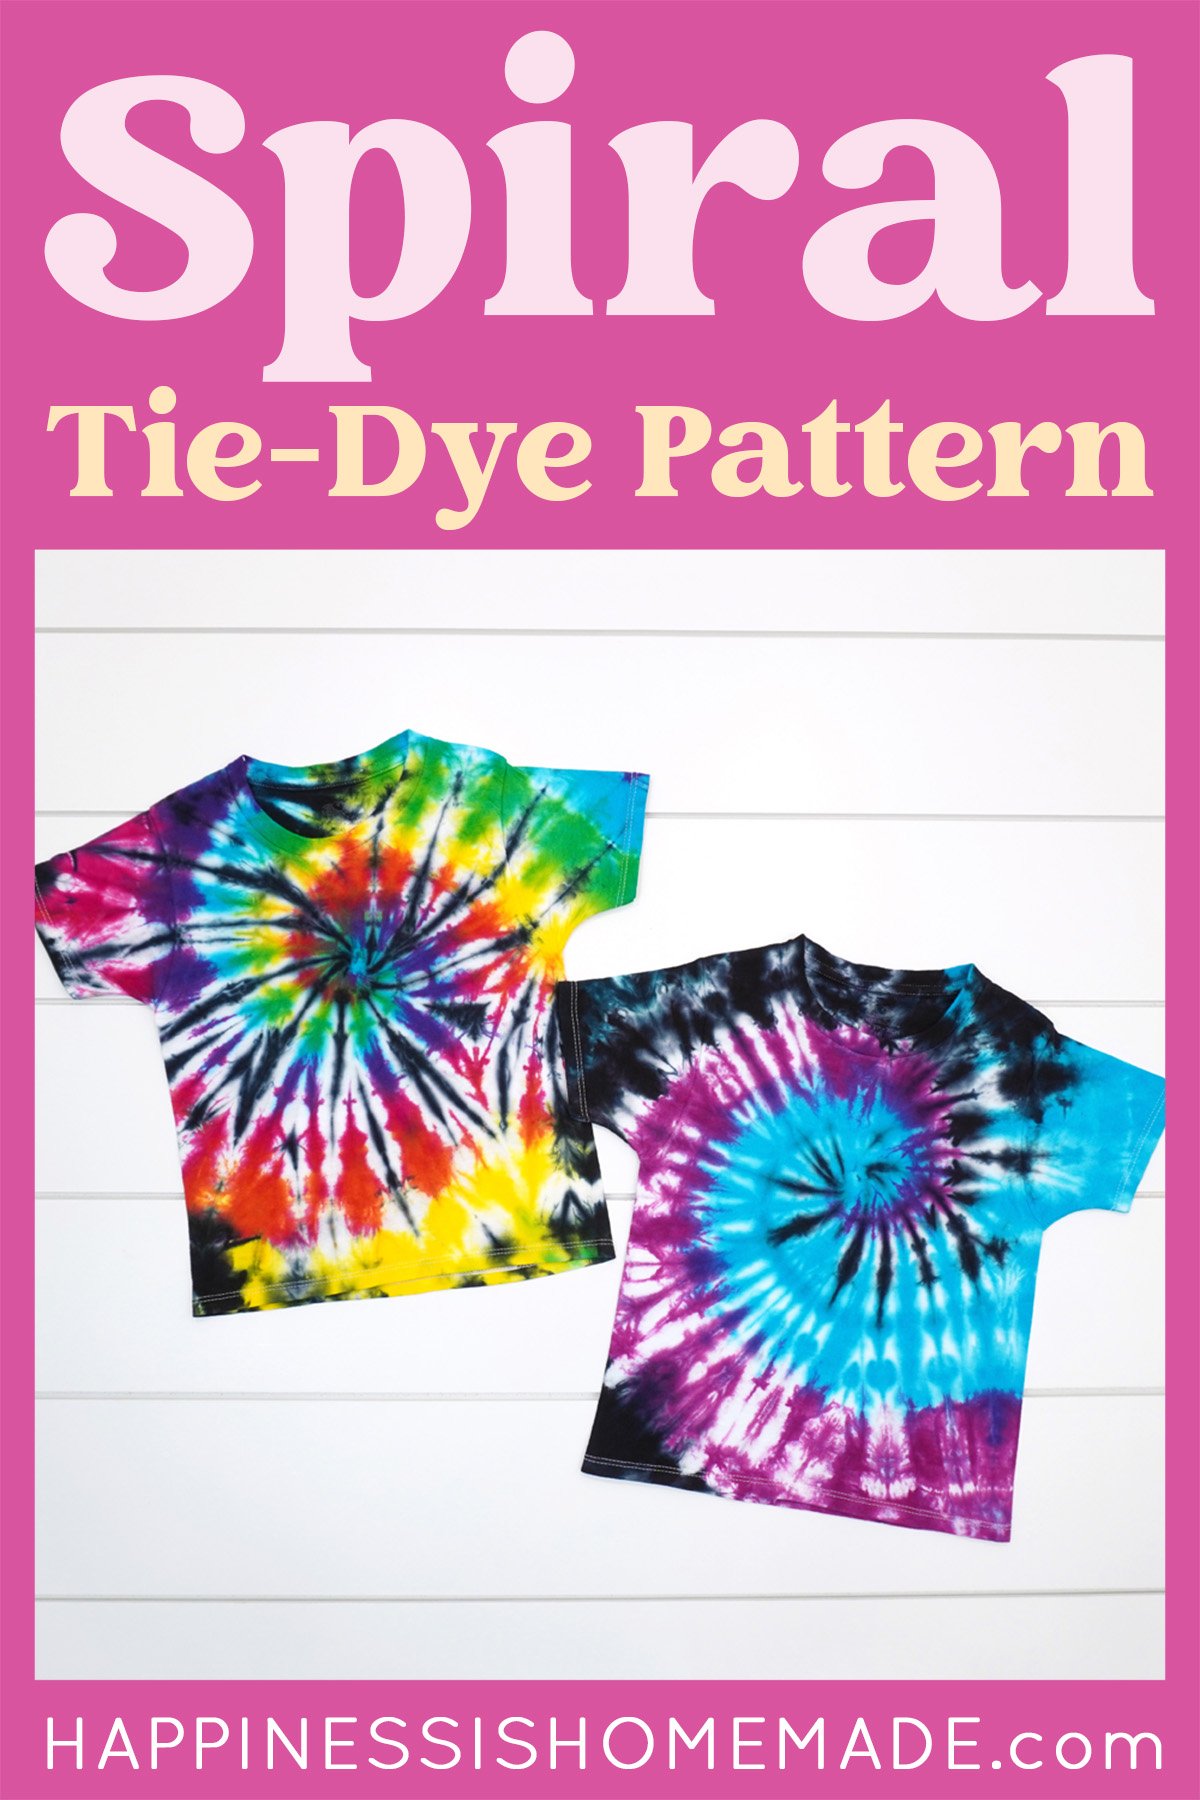 Spiral Tie-Dye Pattern: How to Fold and Dye